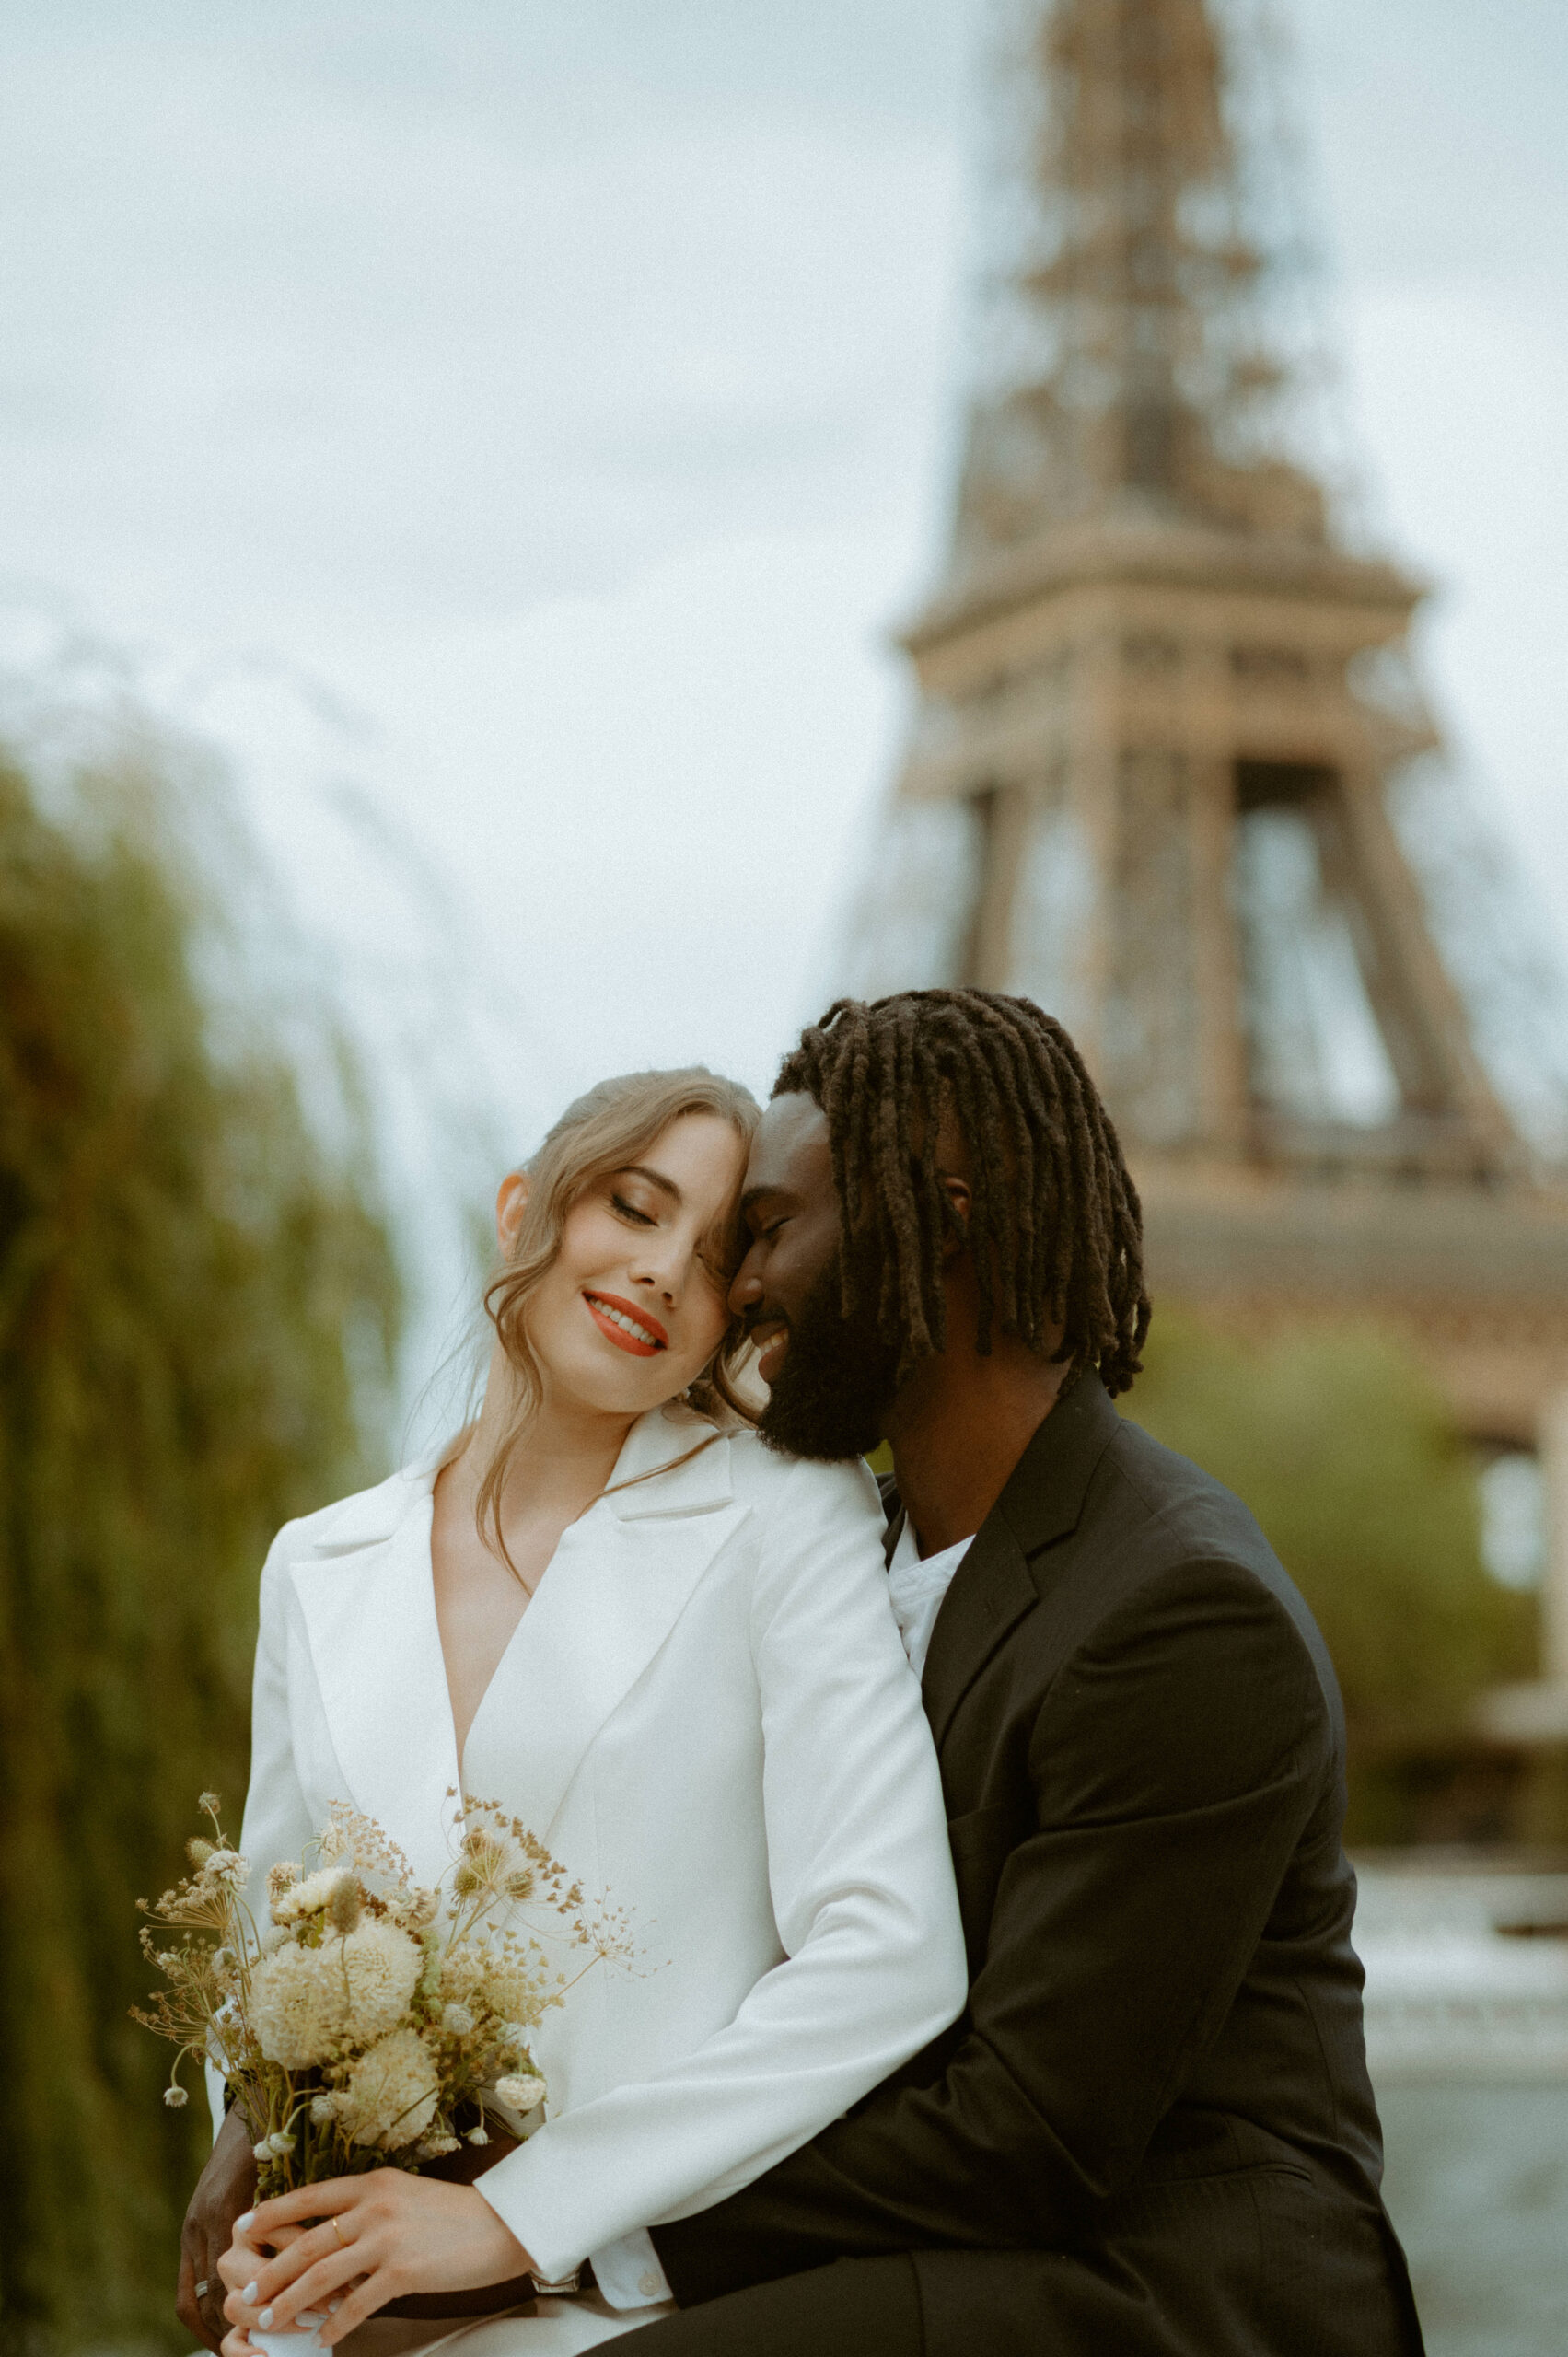 Learn how to Elope in Paris and have your dream Parisian elopement day